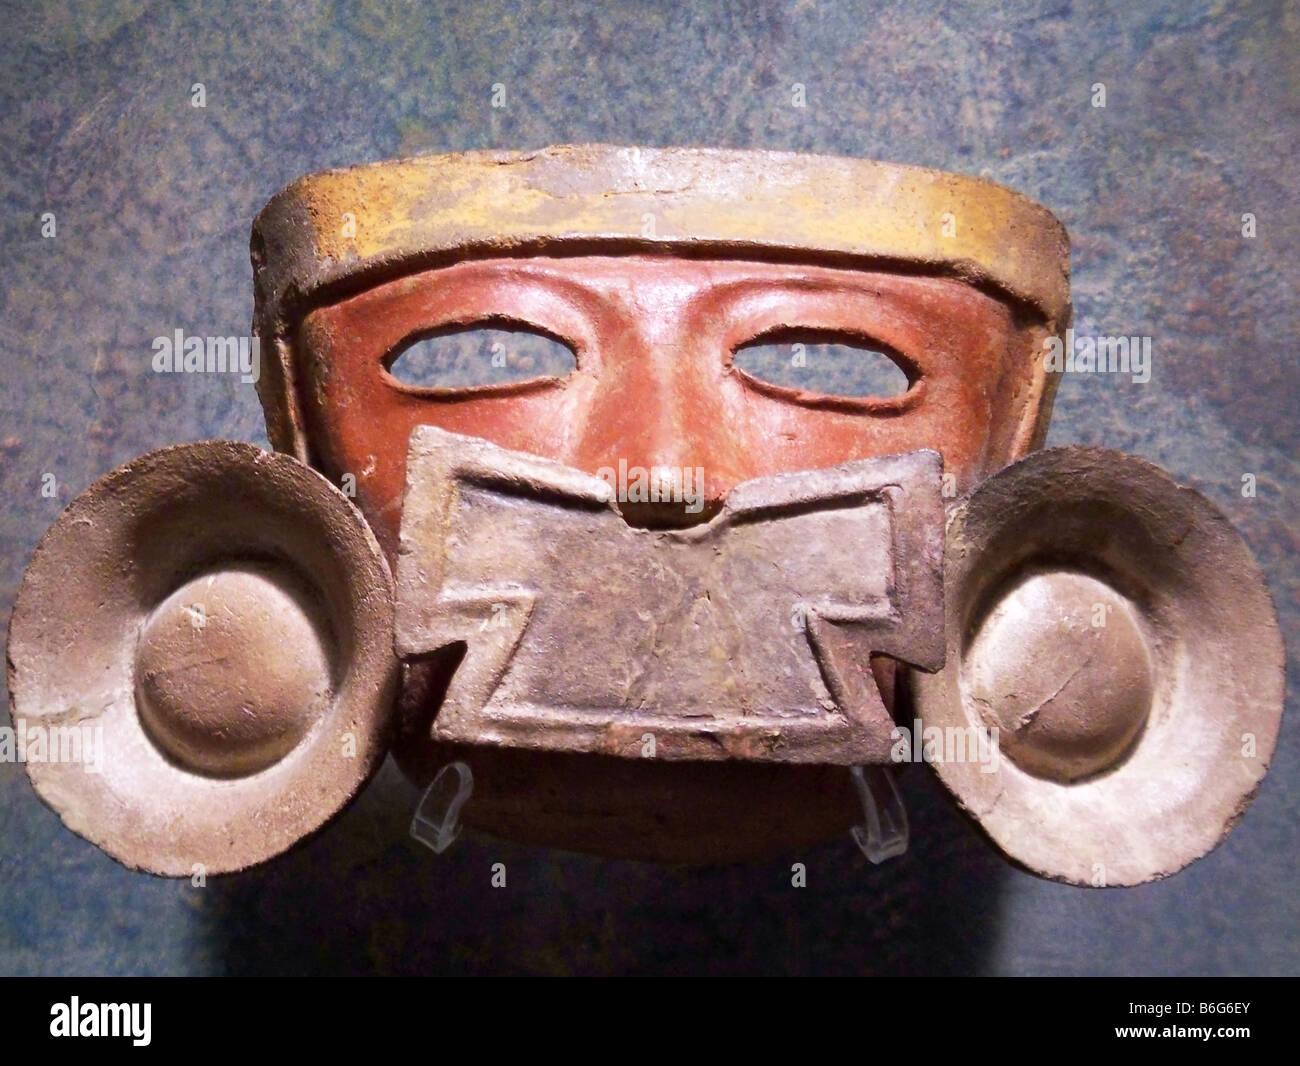 terracotta Chacmool mask, Anthropological Museum, Mexico City DF Stock Photo